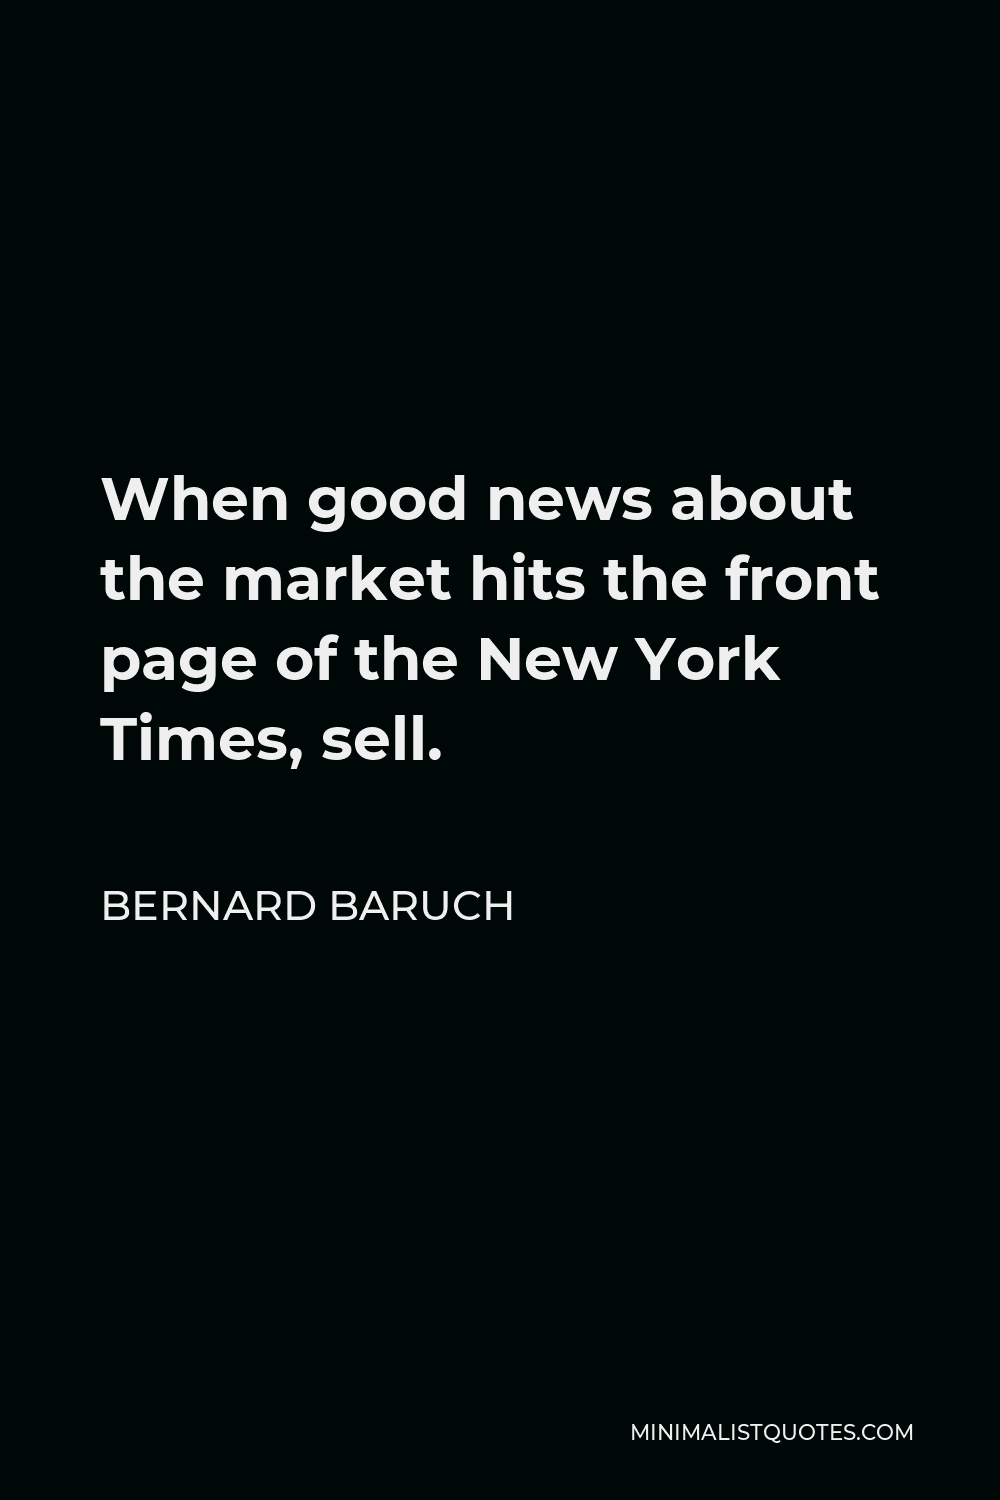 Bernard Baruch Quote - When good news about the market hits the front page of the New York Times, sell.